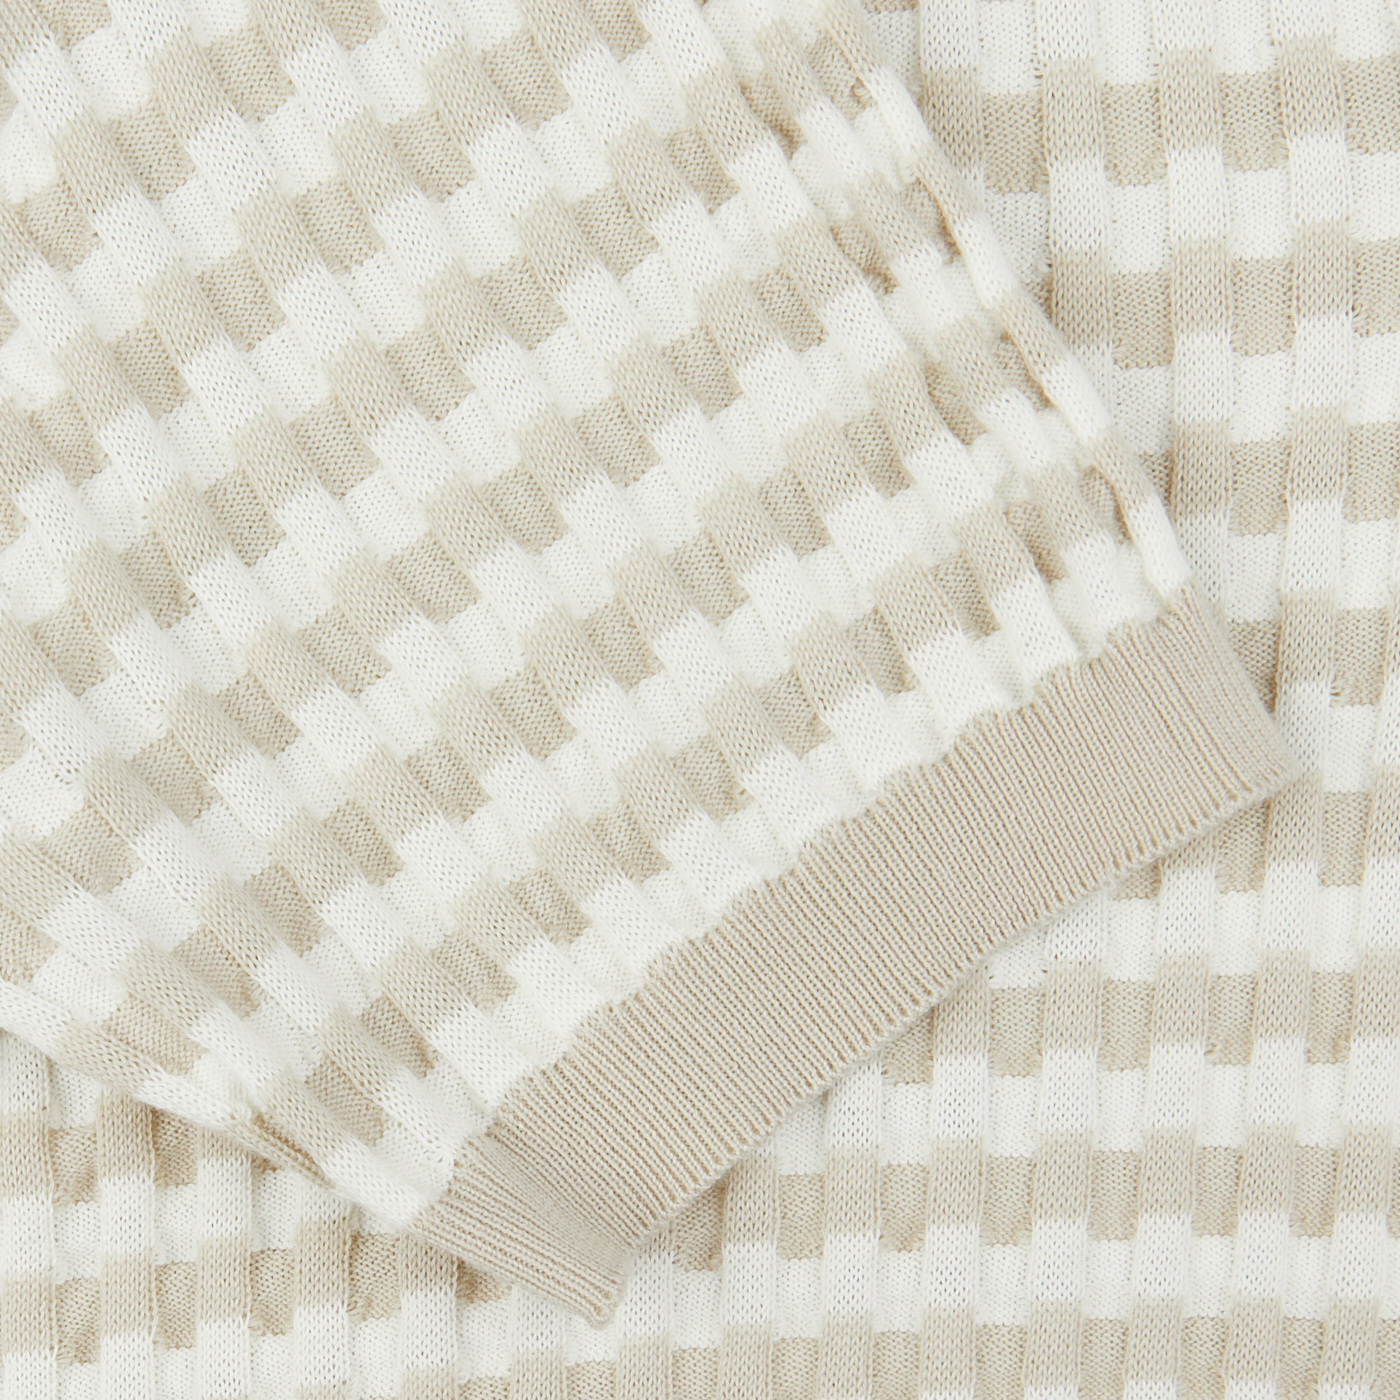 Close-up of a Cream Beige Cotton Rib-Knitted Polo Shirt from Mauro Ottaviani with a checkered pattern and a frayed edge.